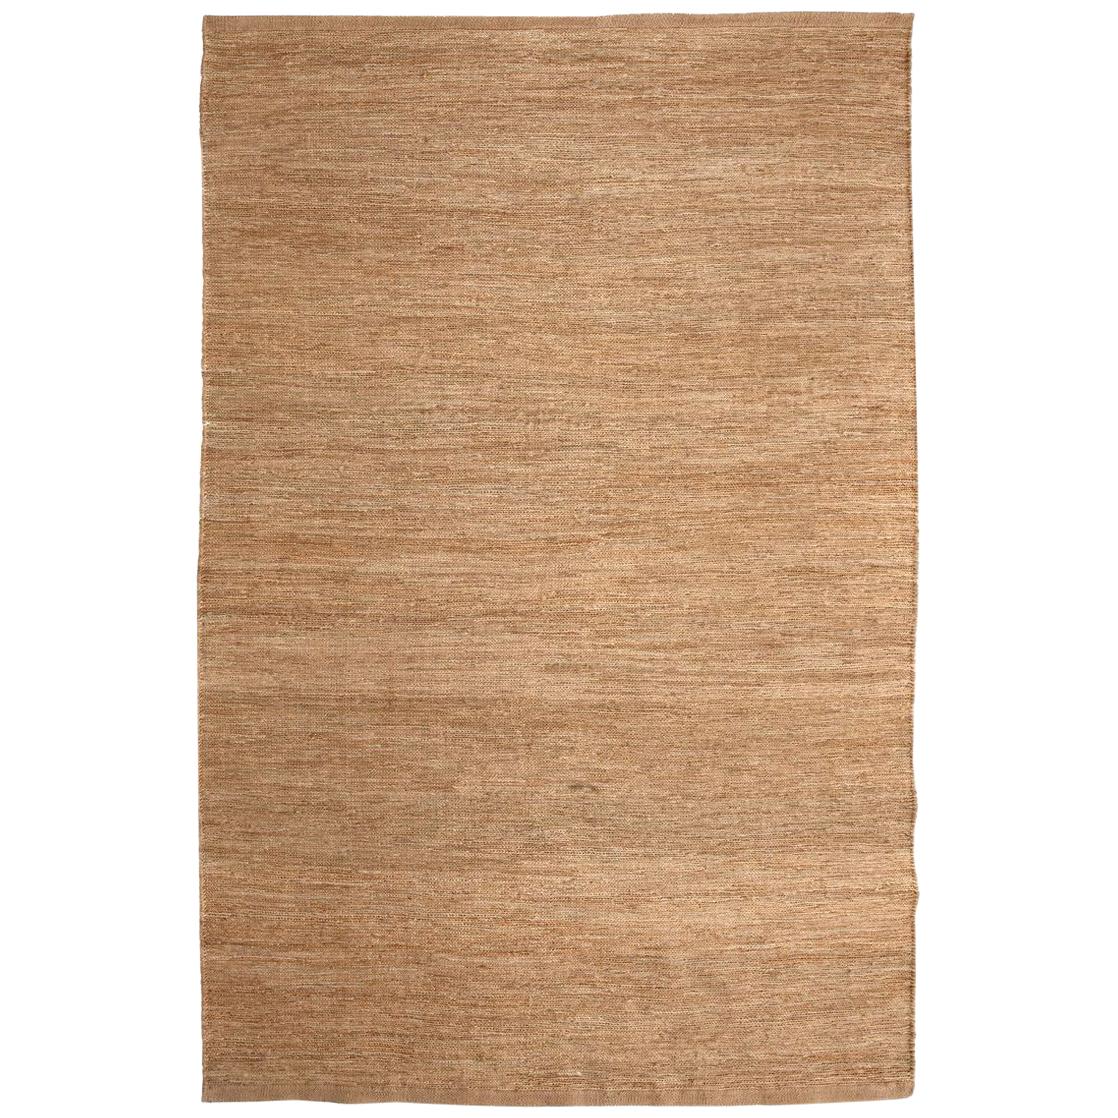 Knitted Natural Hand-Loomed Jute Rug by Nani Marquina & Ariadna Miquel, Medium For Sale